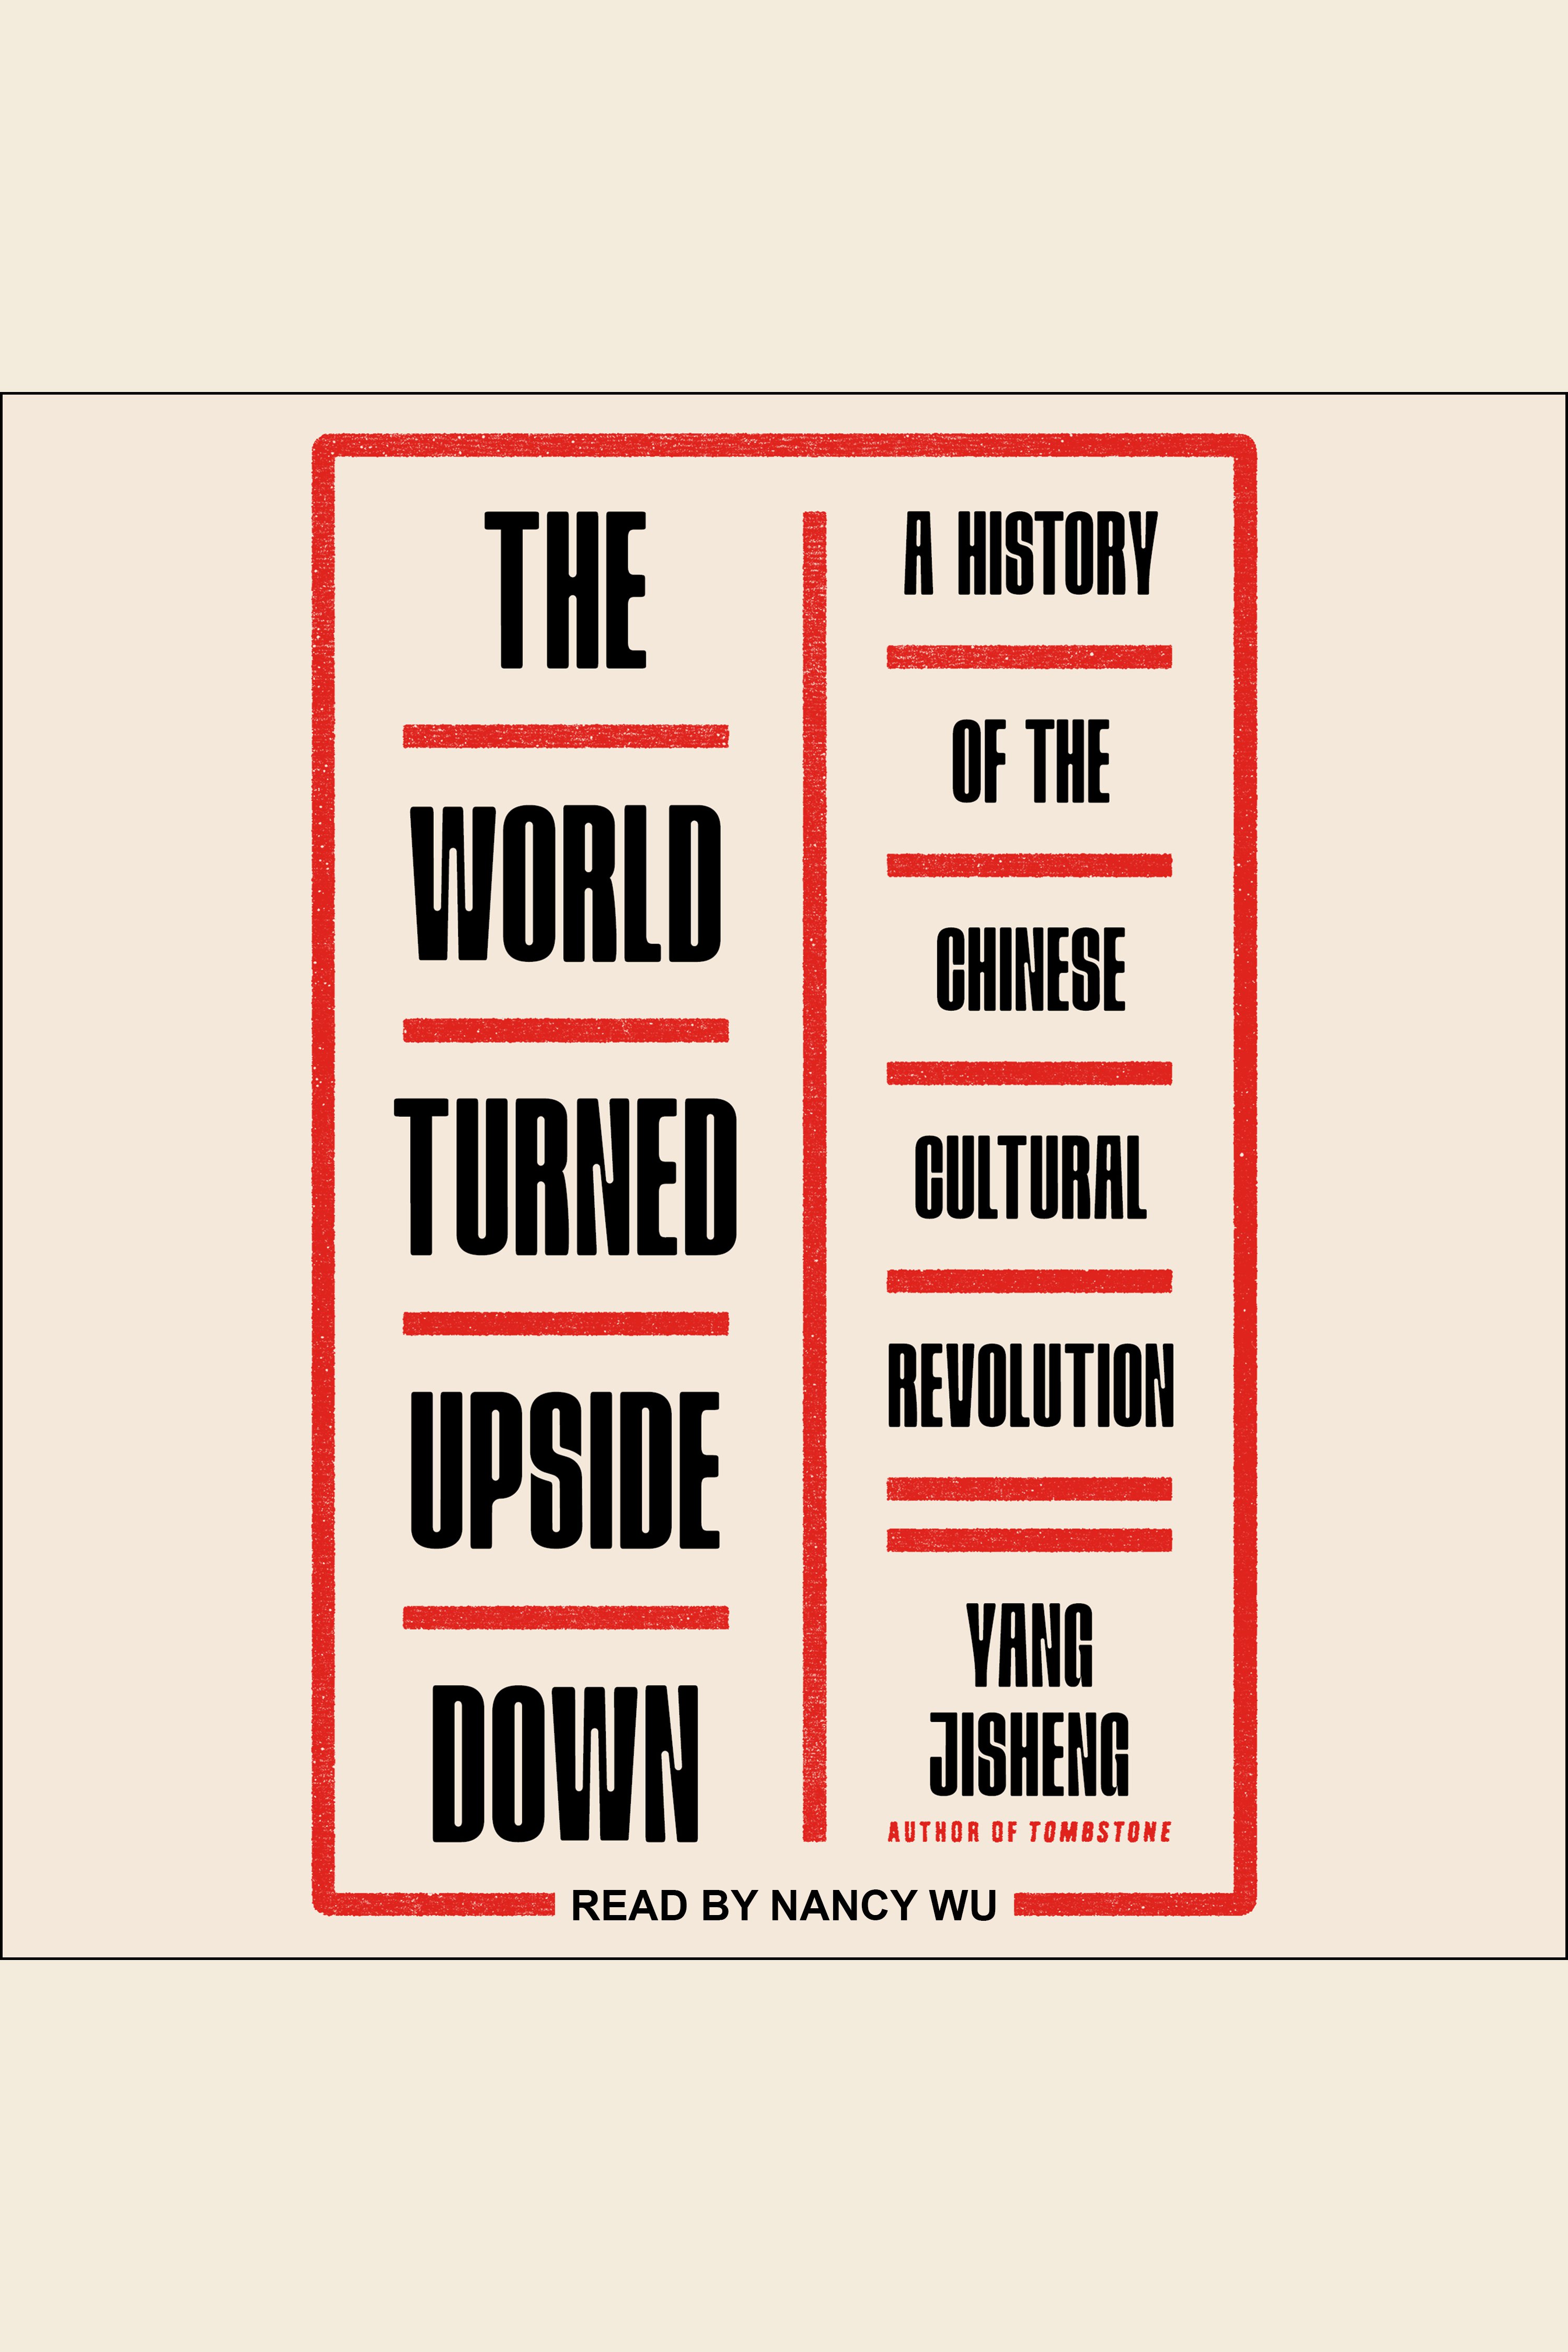 Image de couverture de The World Turned Upside Down [electronic resource] : A History of the Chinese Cultural Revolution